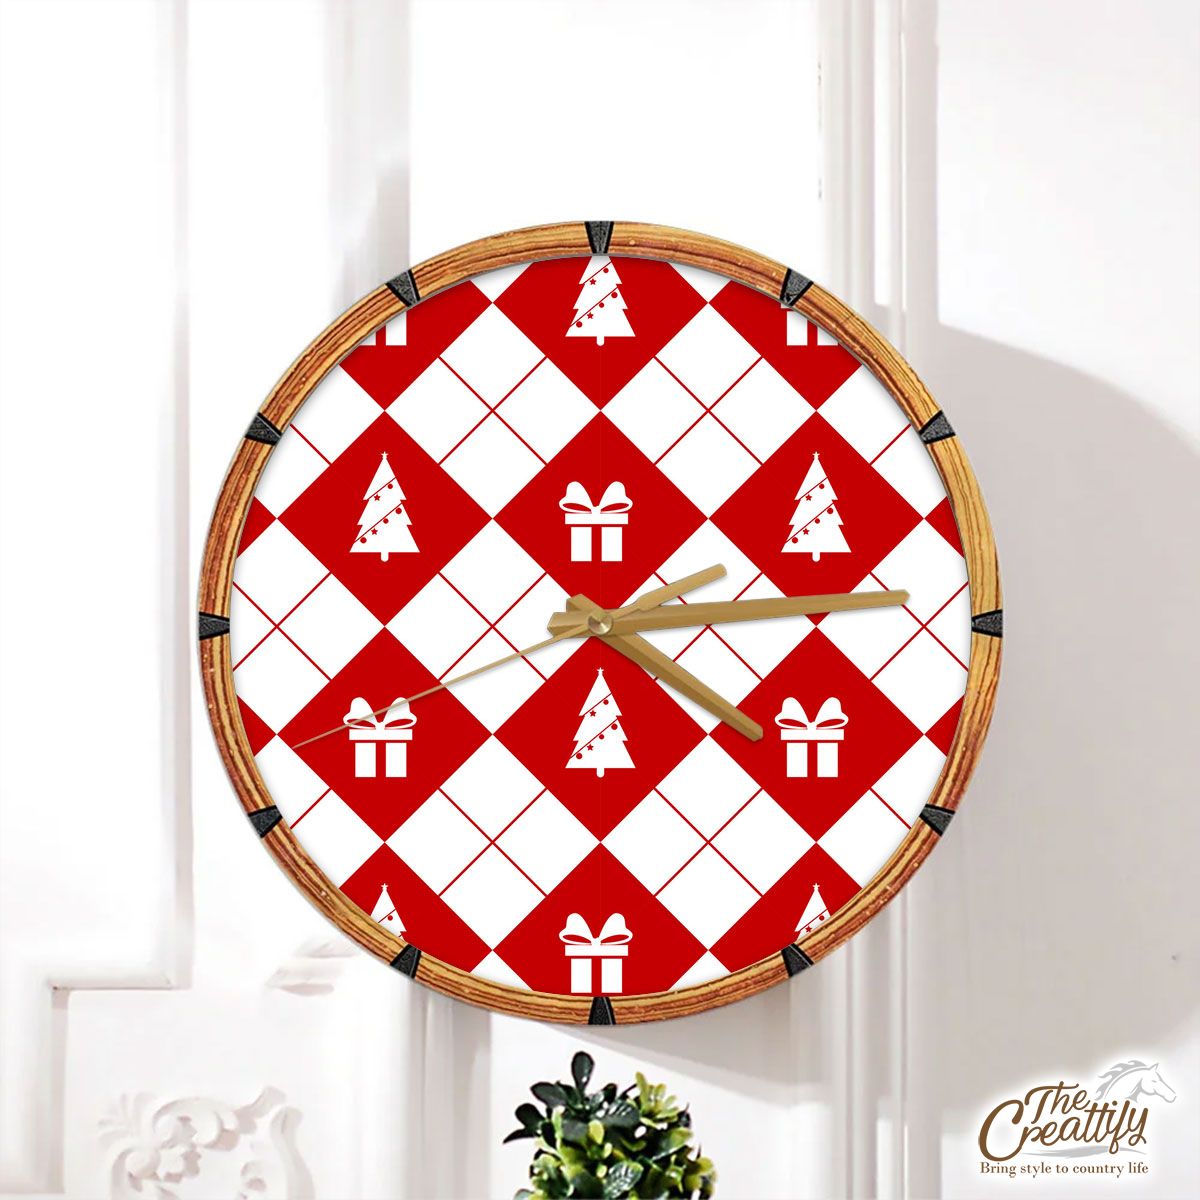 Christmas Gifts And Pine Tree Decorated With Lights On Red And White Background Wall Clock